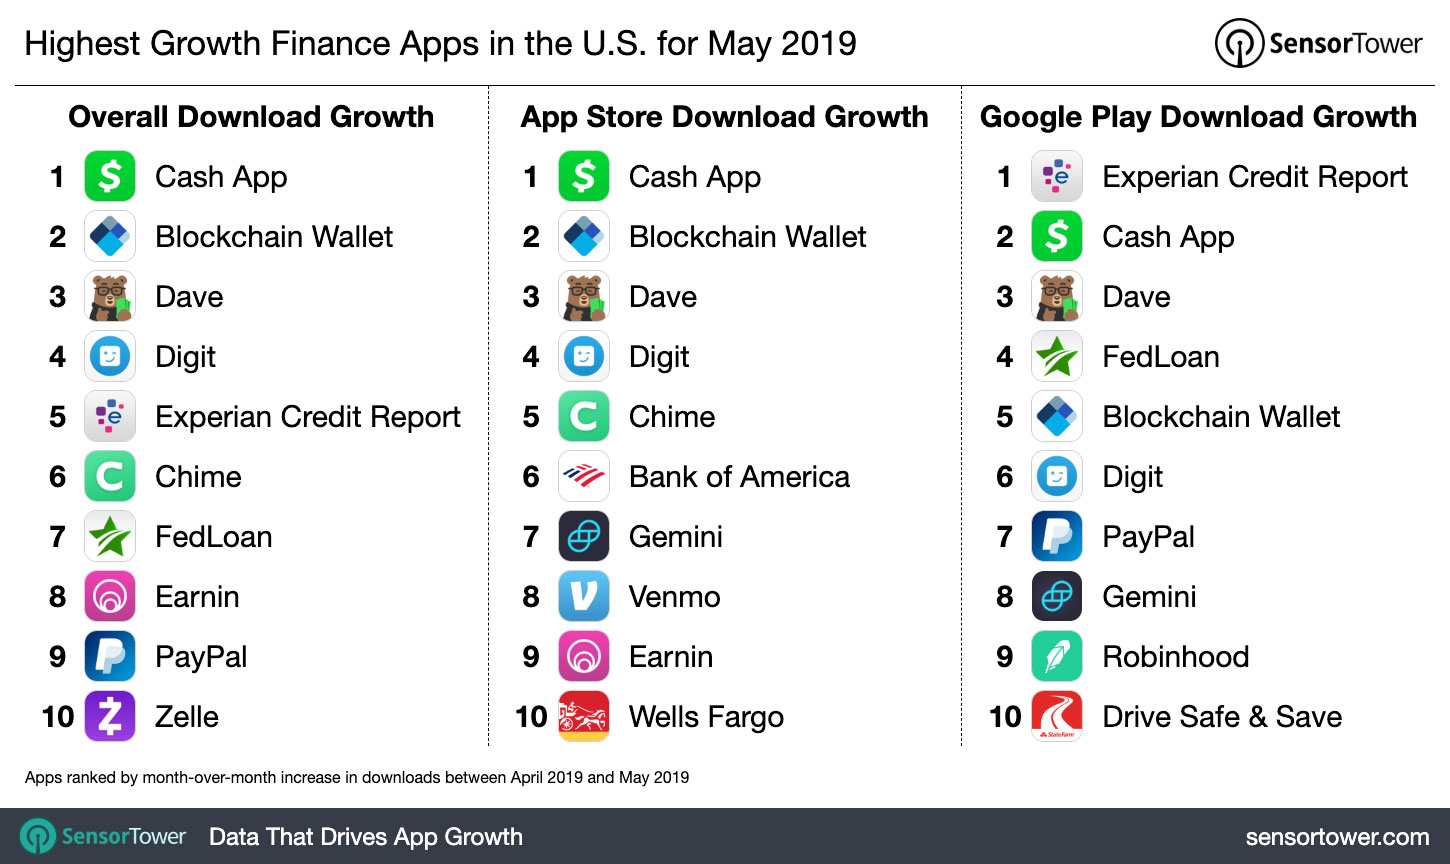 Highest Growth Finance Apps in the U.S. for May 2019 by Downloads